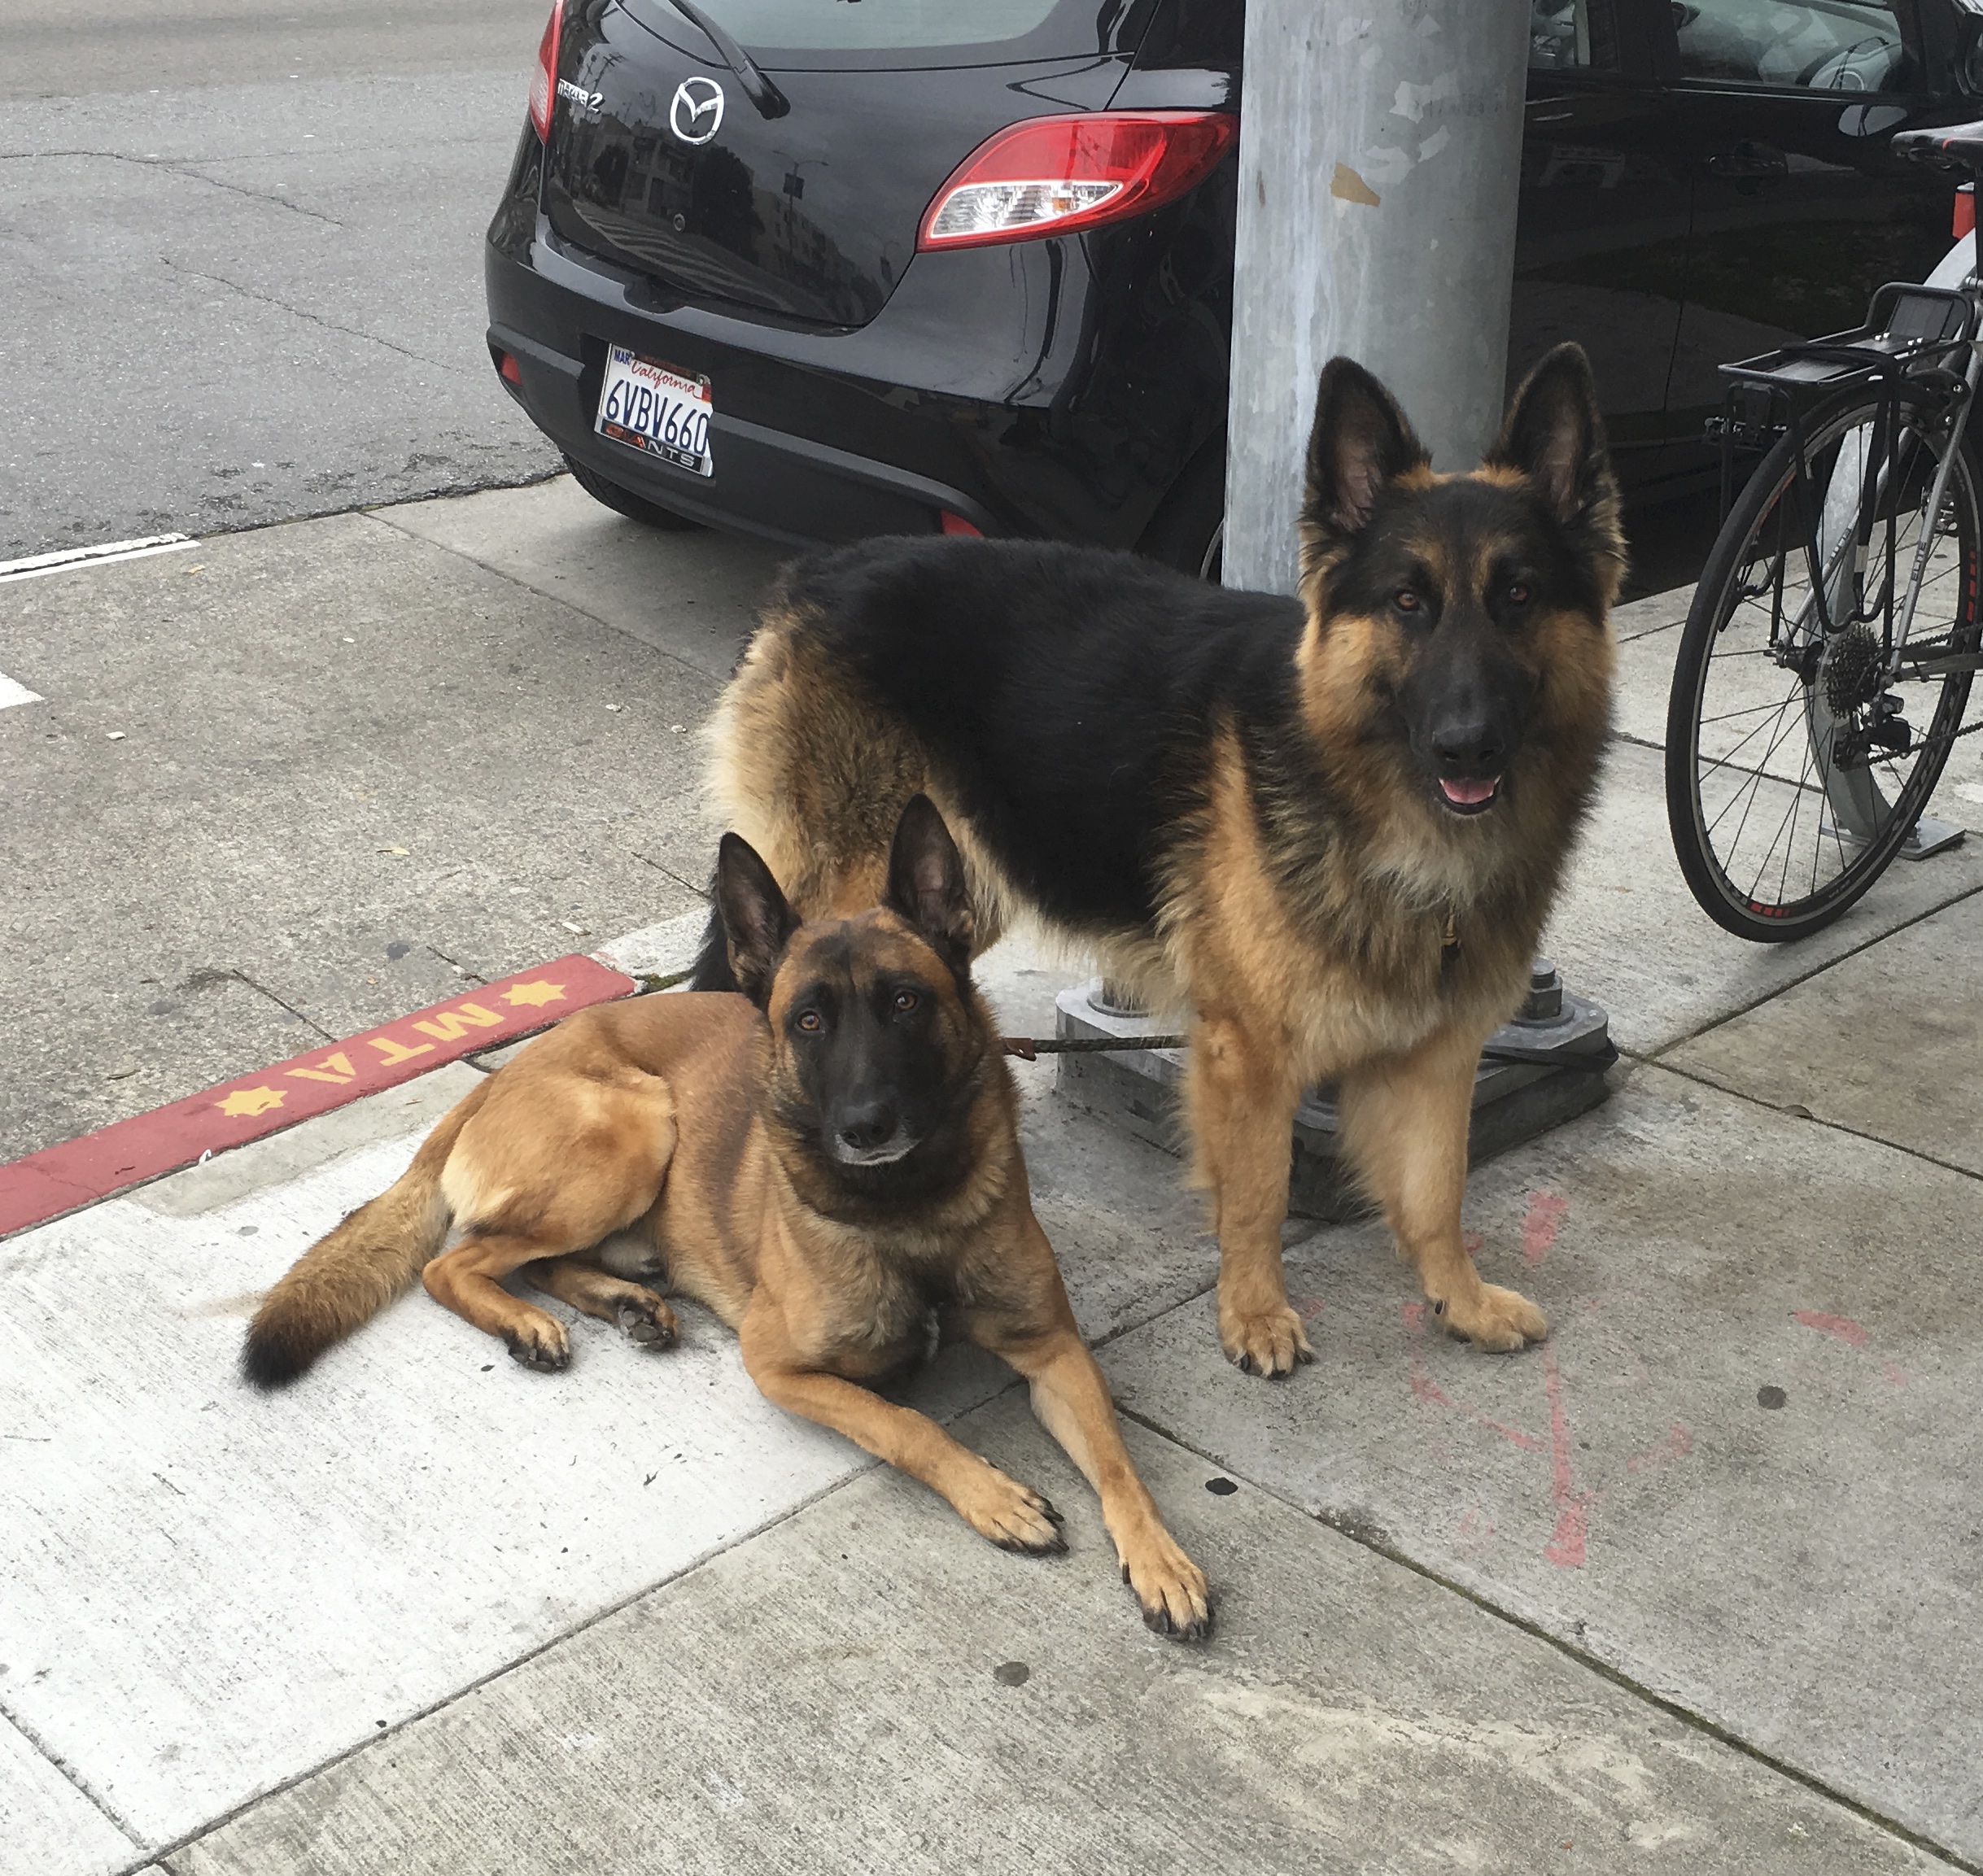 Two Belgian Shepherds, A Malinois And A Tervuren, Posting